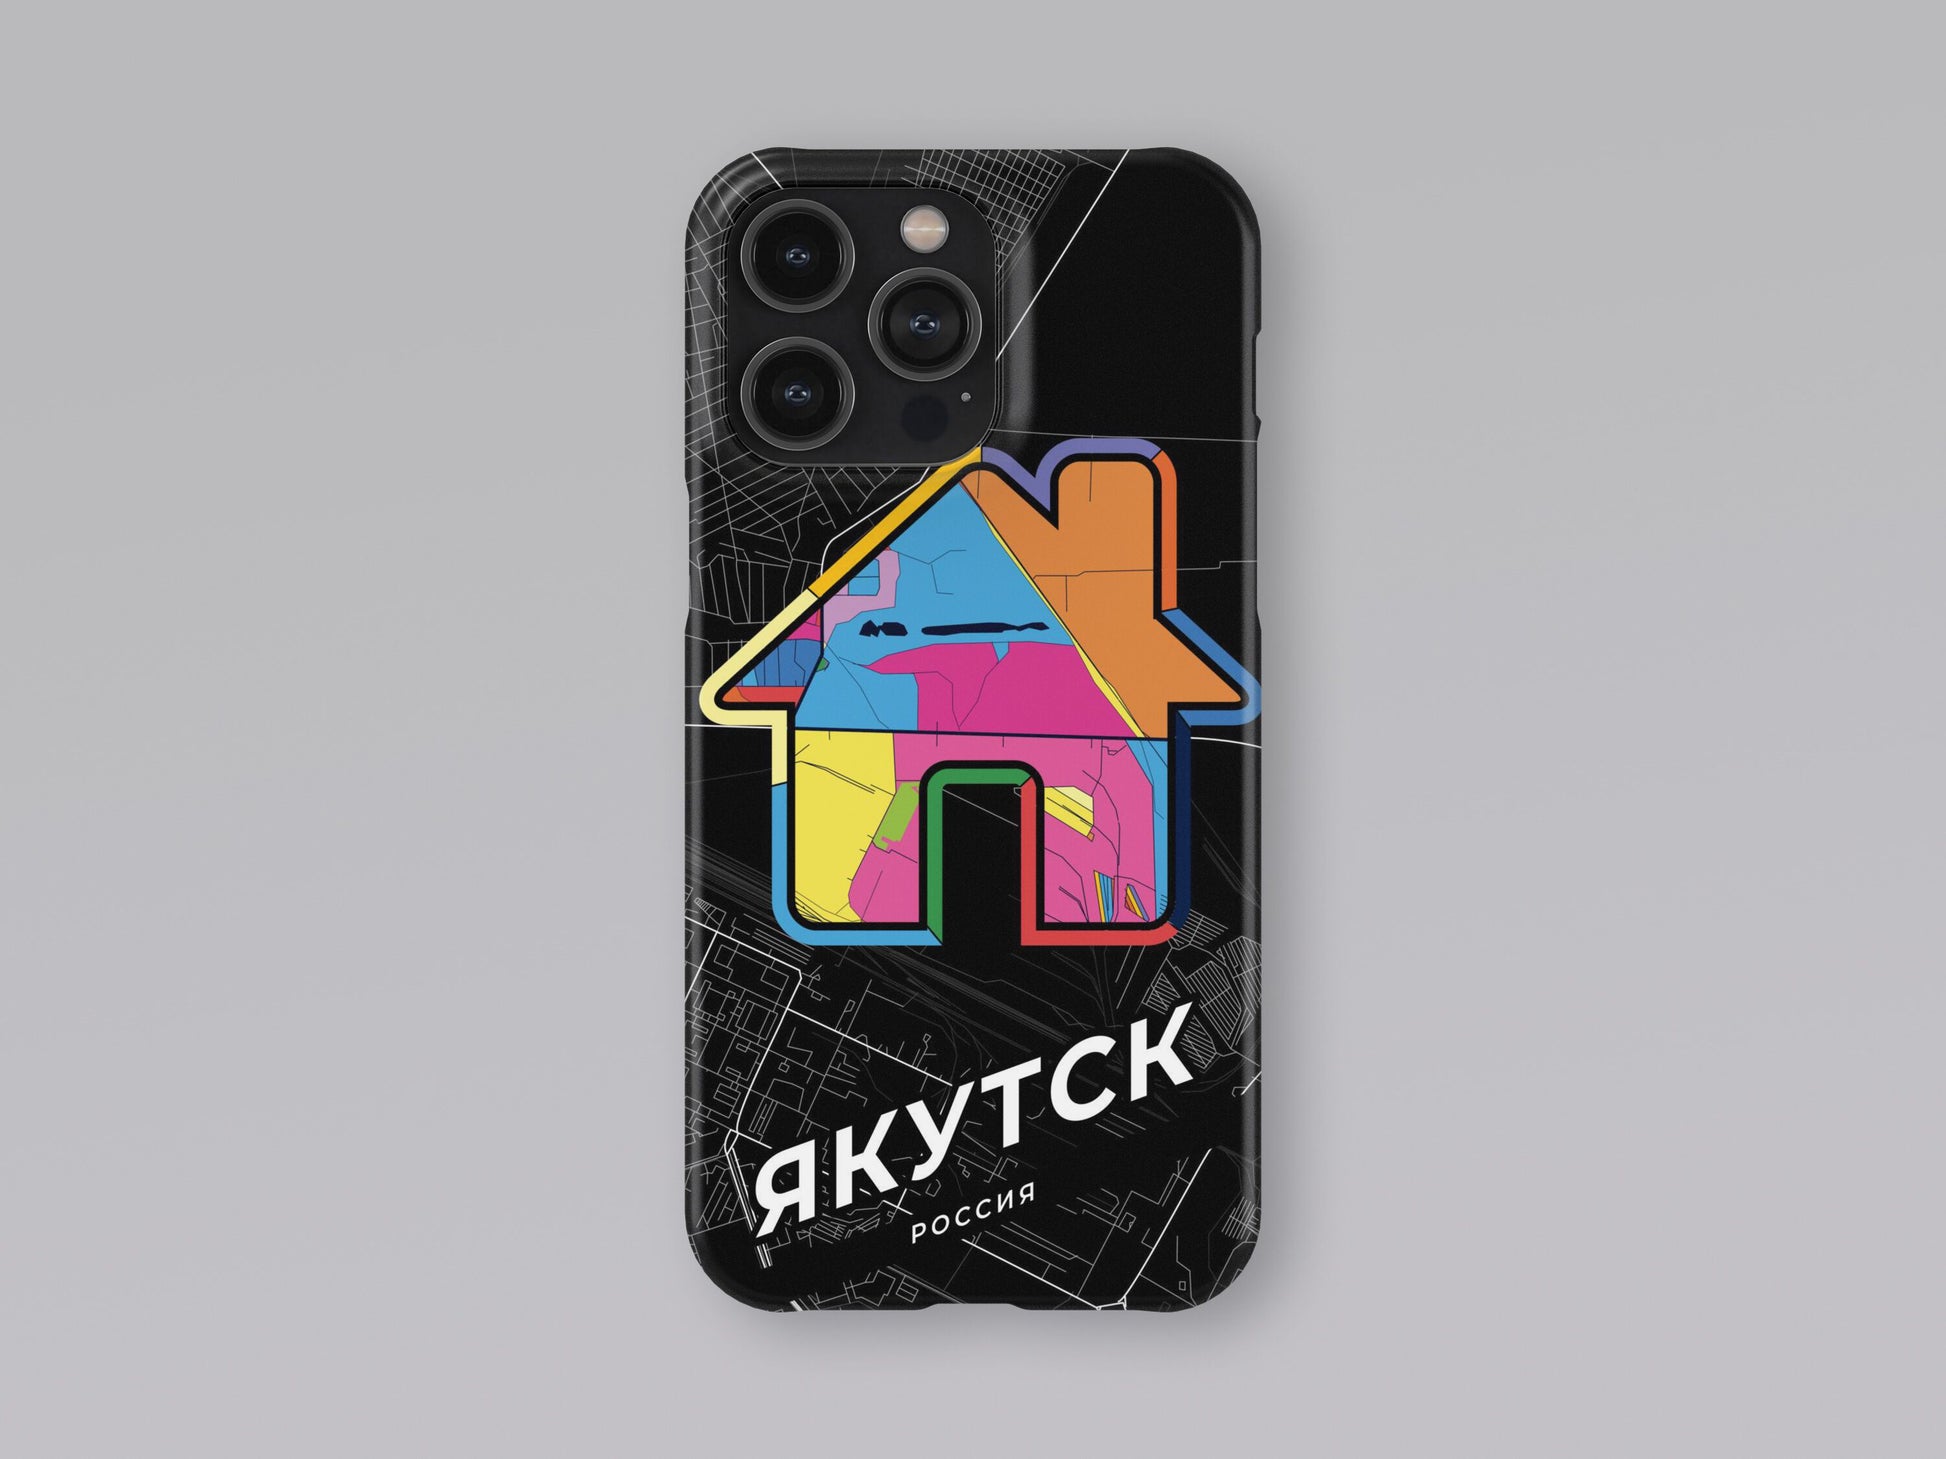 Yakutsk Russia slim phone case with colorful icon 3